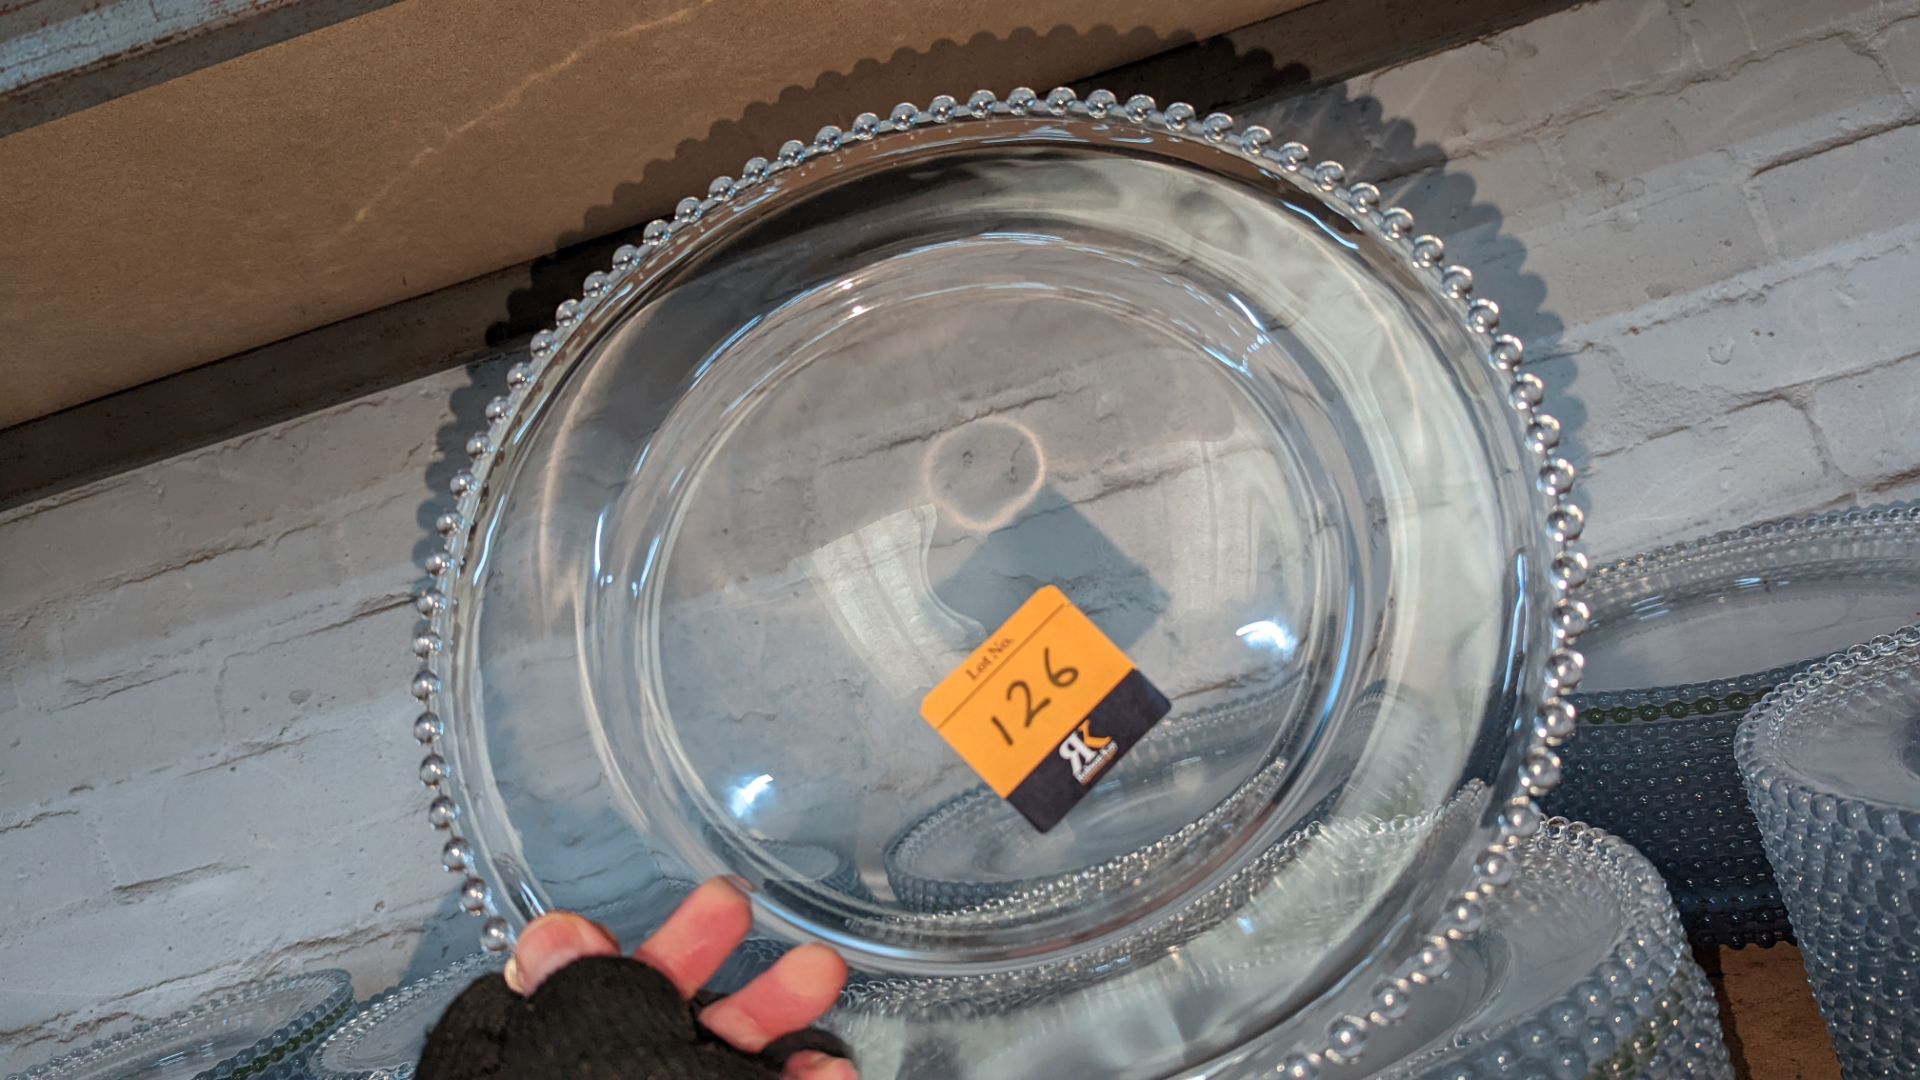 30 off glass plates each measuring approximately 32cm diameter. All the plates have a beading effec - Image 3 of 3